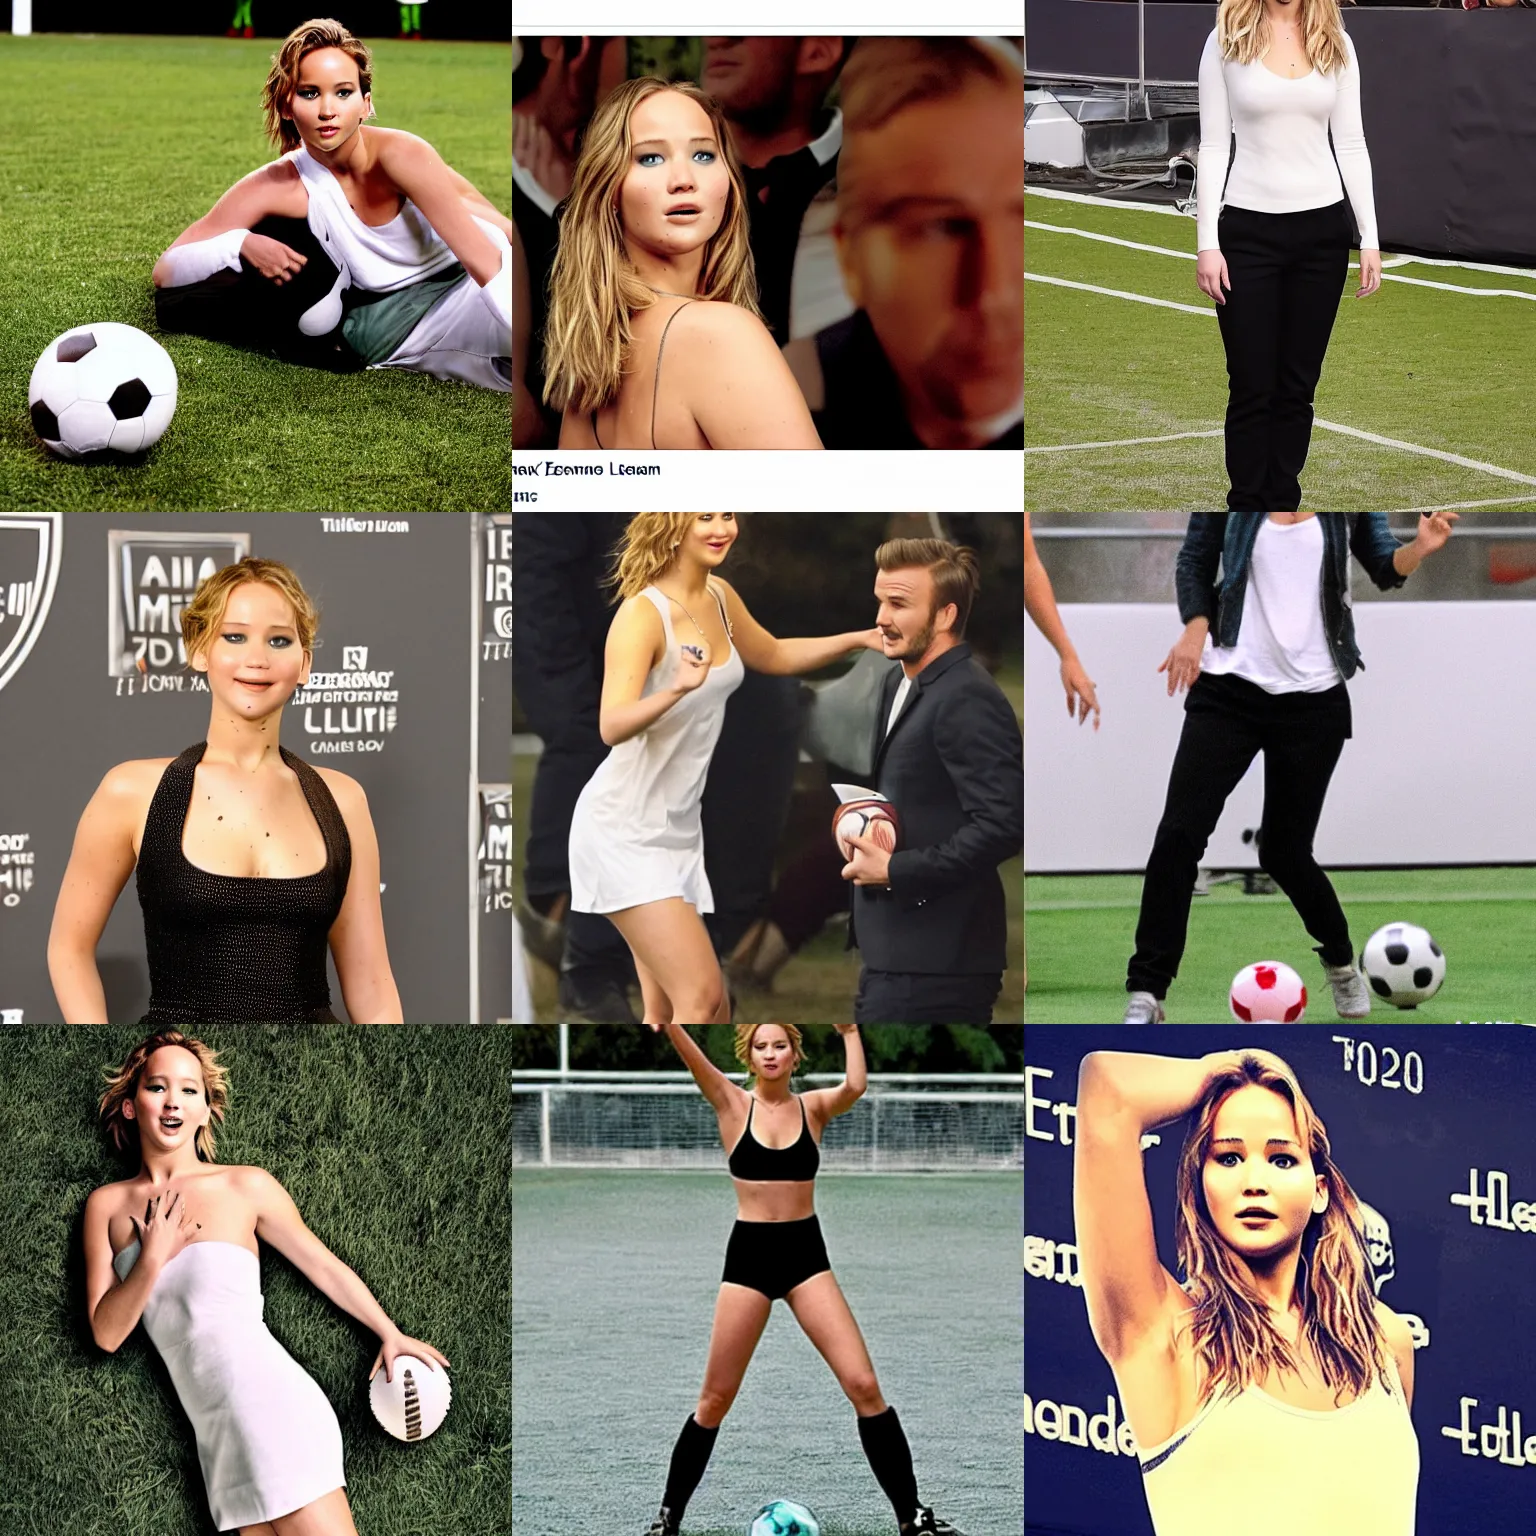 Prompt: Jennifer Lawrence as David Beckham, posing with her foot on a football